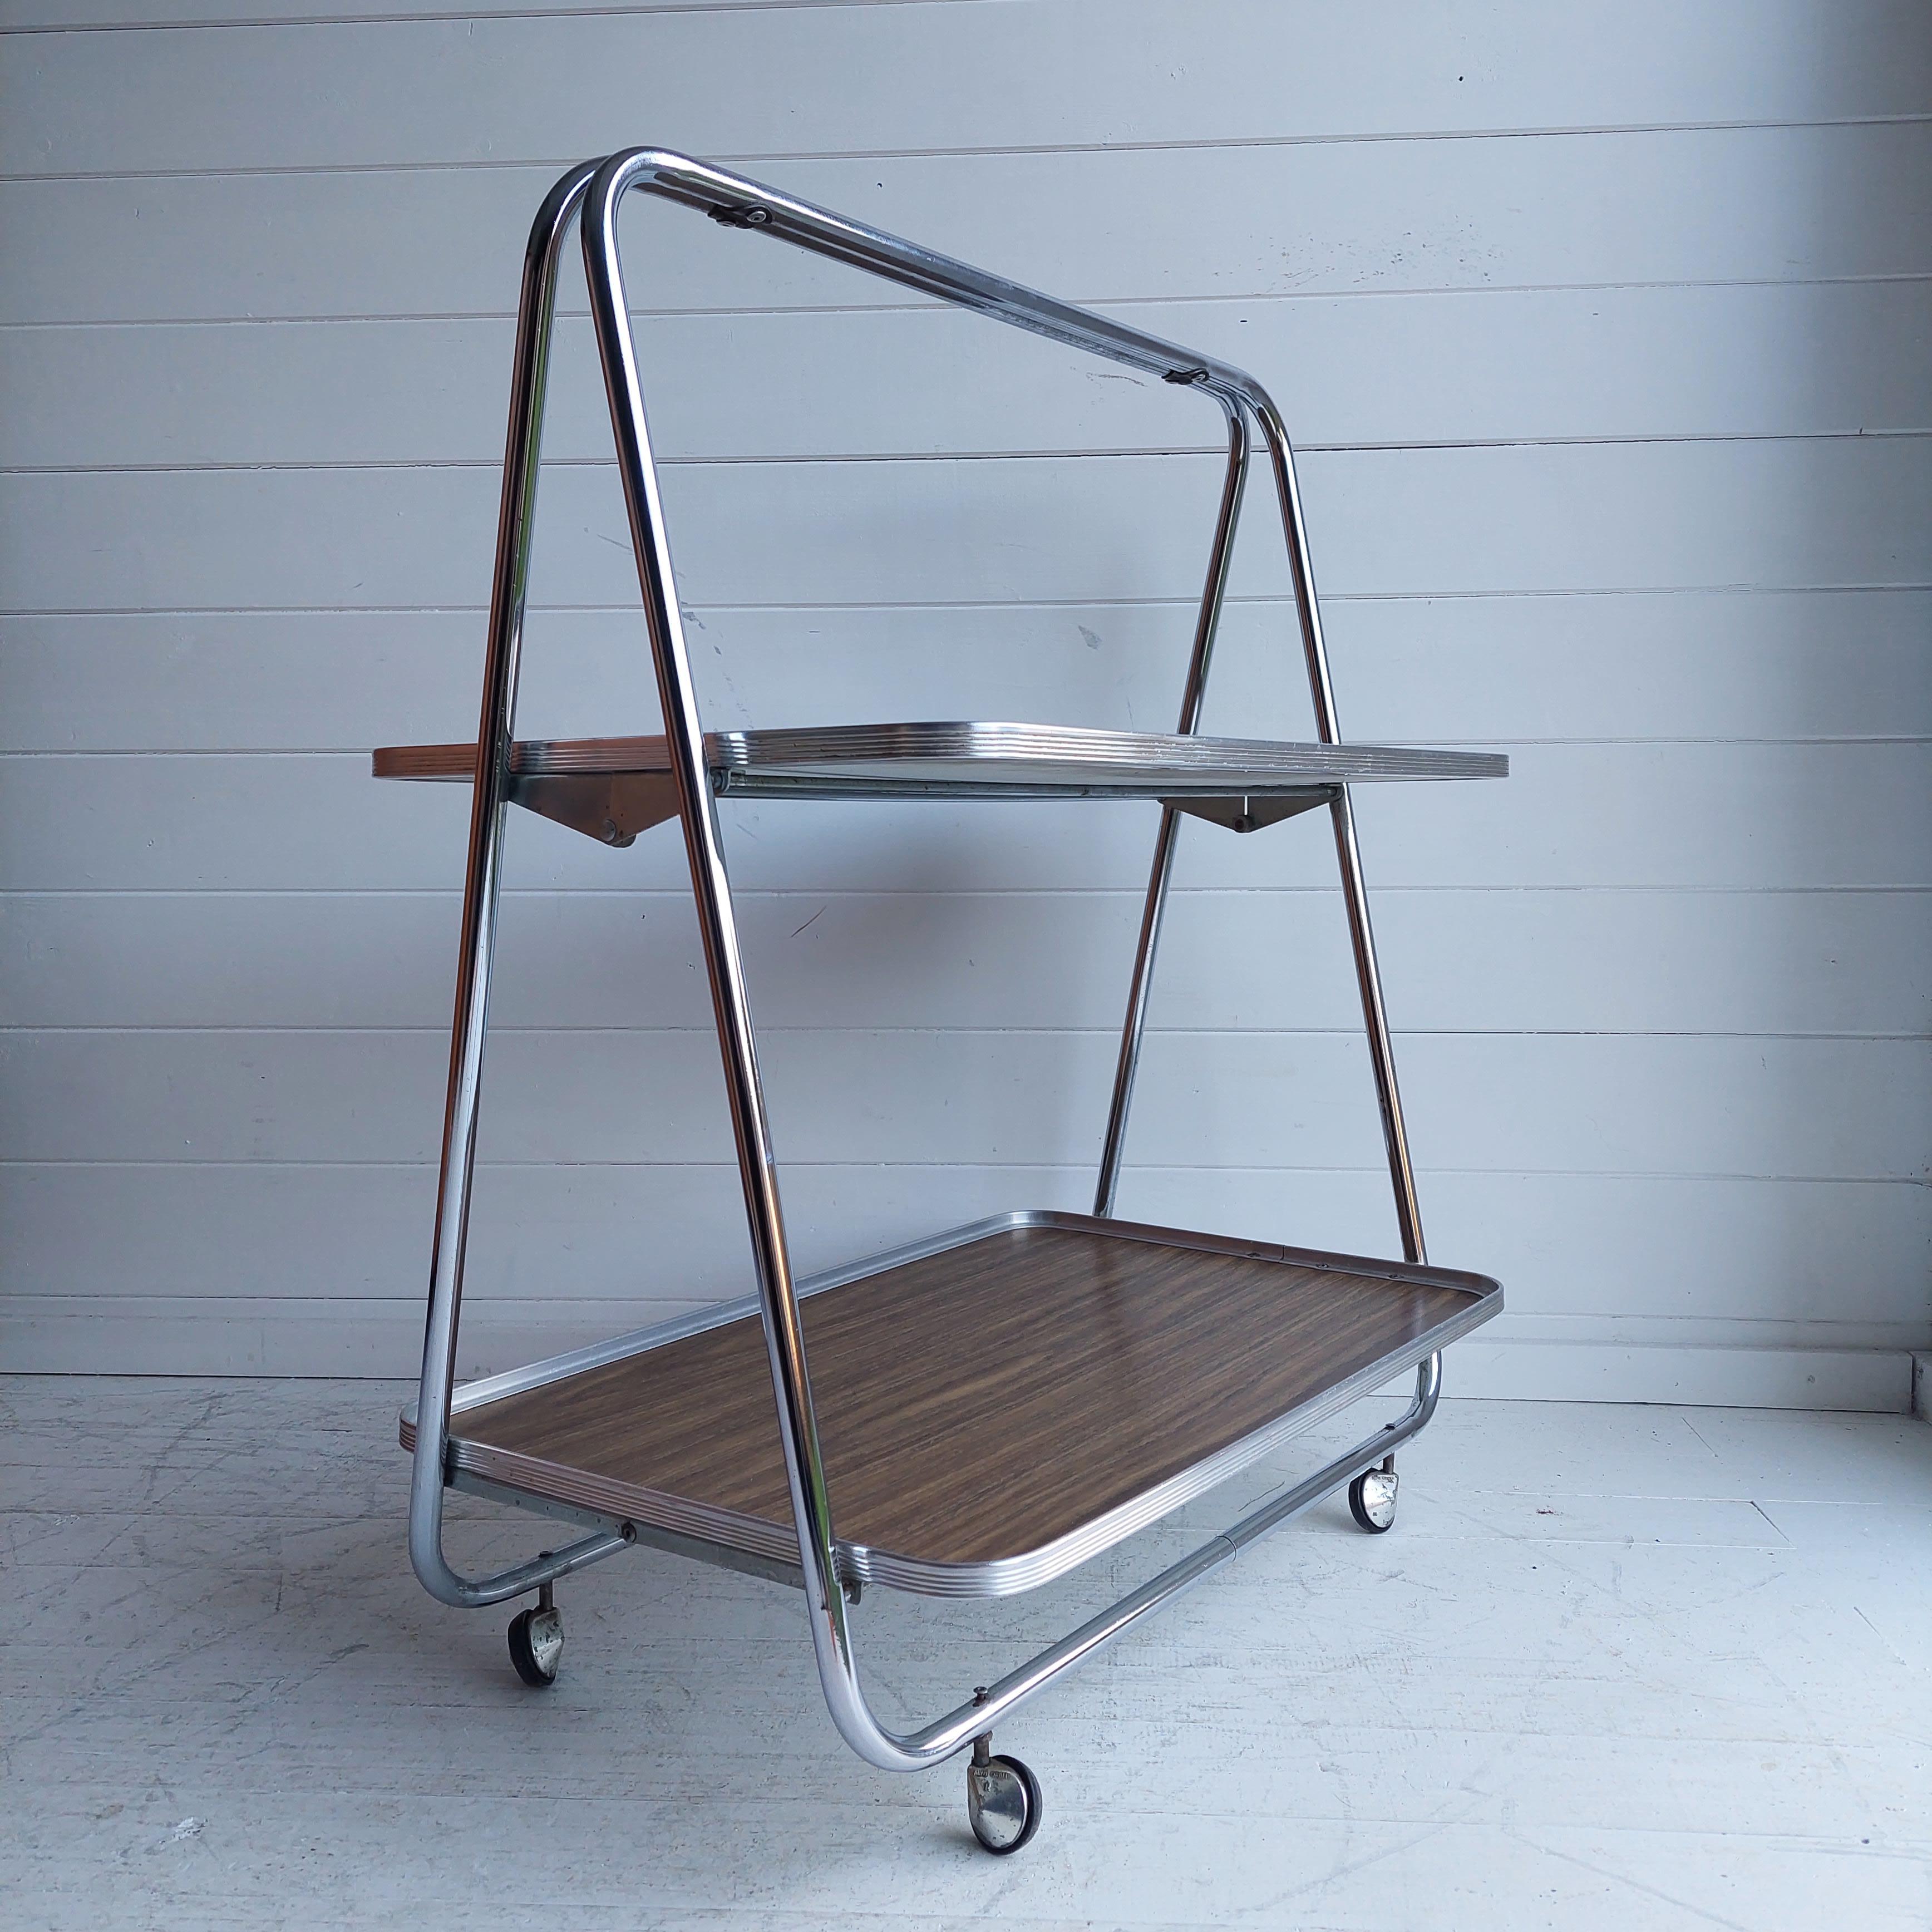 A vintage folding drinks bar cart / tea & cake serving trolley or a portable music stand.
Manufactured in england under Italian Robex influence 1970s.

This is a stylistic vintage retro item with stylish design and creative engineering.

Two